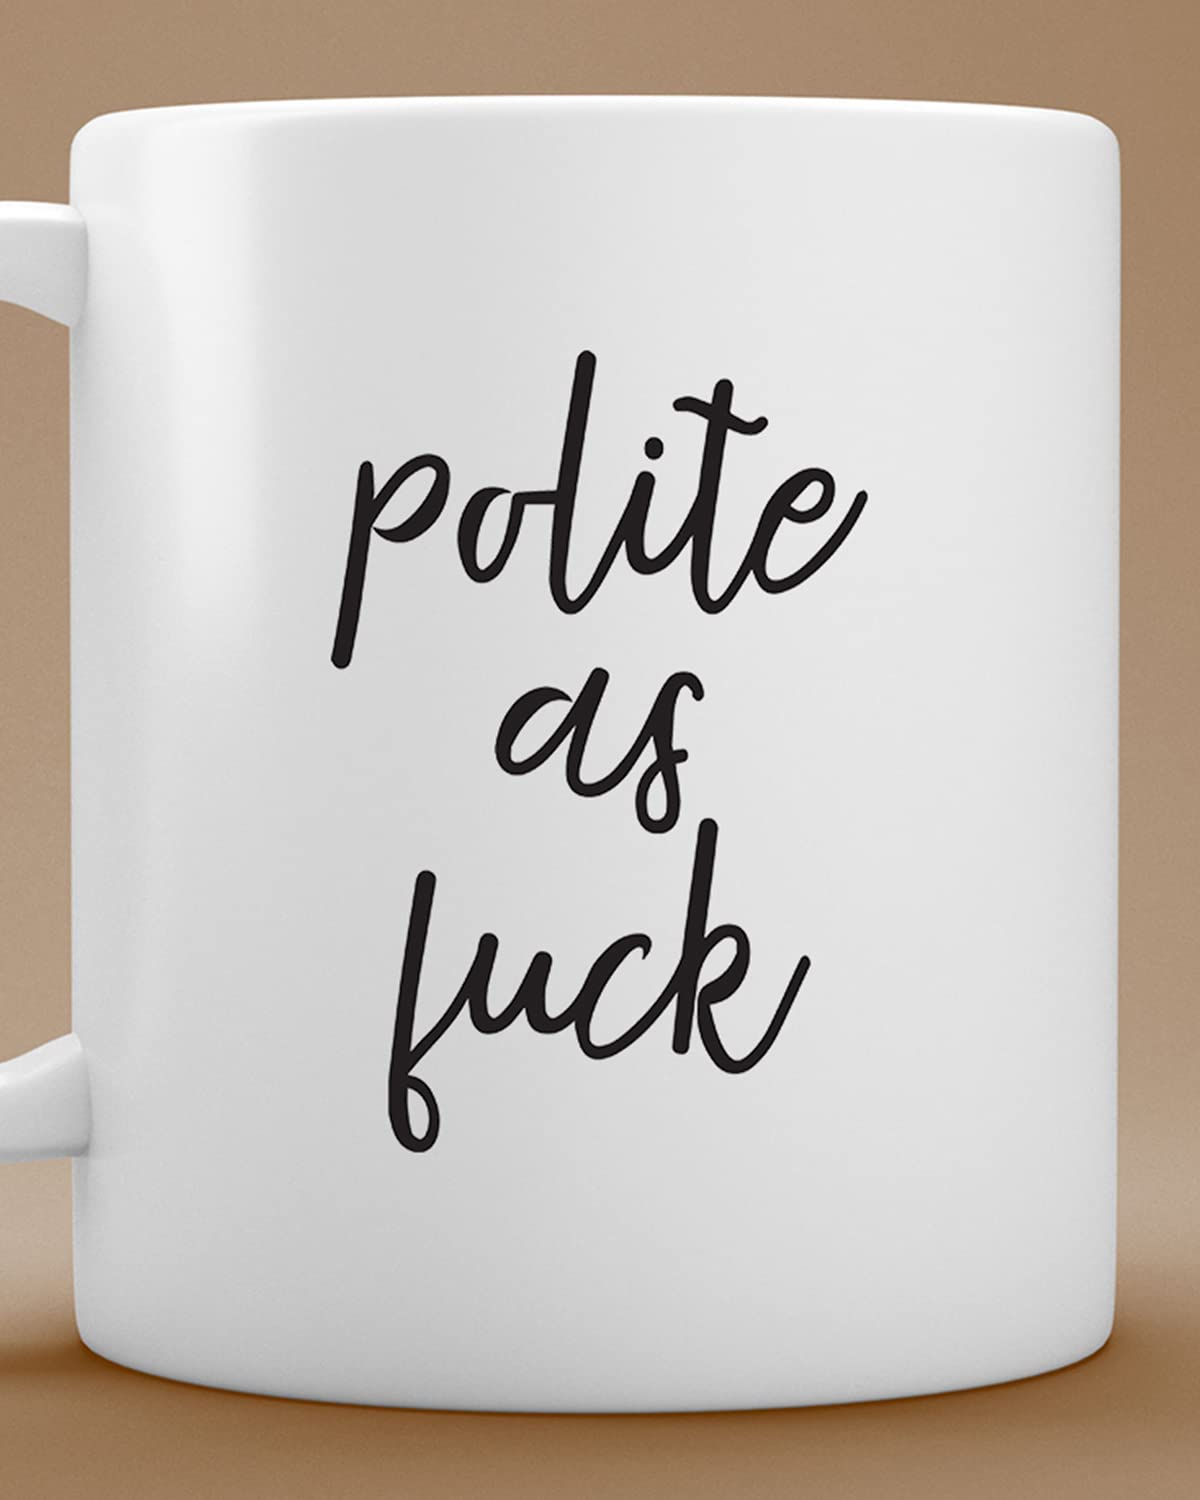 The Pink Magnet Polite As Fuck Coffee Mug | Romantic Printed Coffee Mug for Birthday,Anniversary Gift,Valentine's Day Gift, for Someone Special Inspirational thoughts | inspiring gifts for boyfriend | inspiring quotes | Printed coffee mug(C